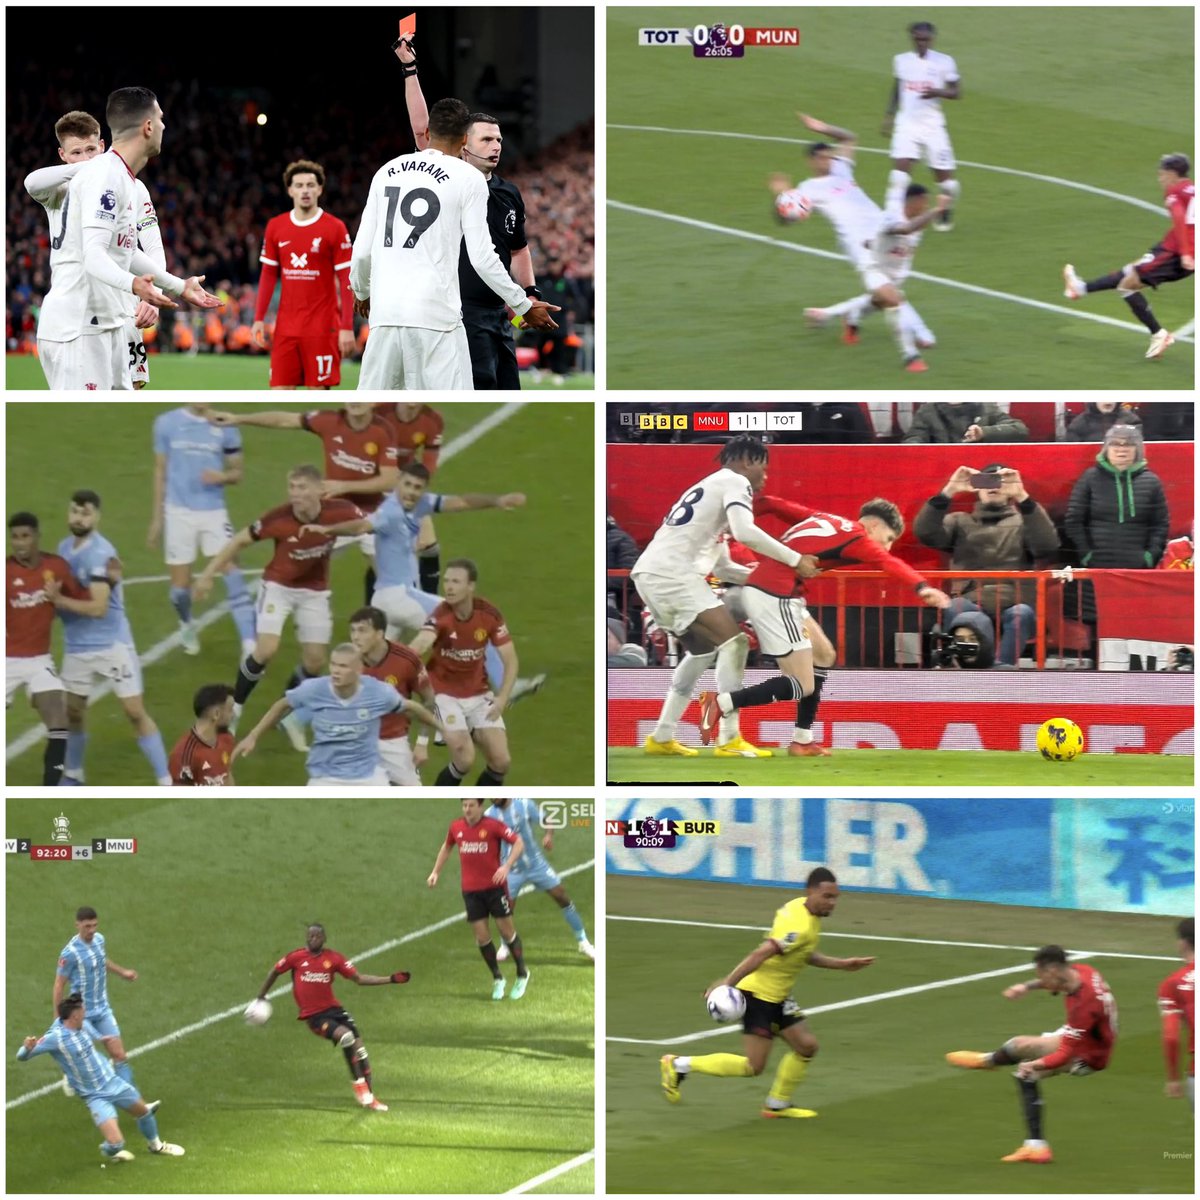 United have been shite this season. Let’s not kid ourselves. But the inconsistency with referees has been a joke.